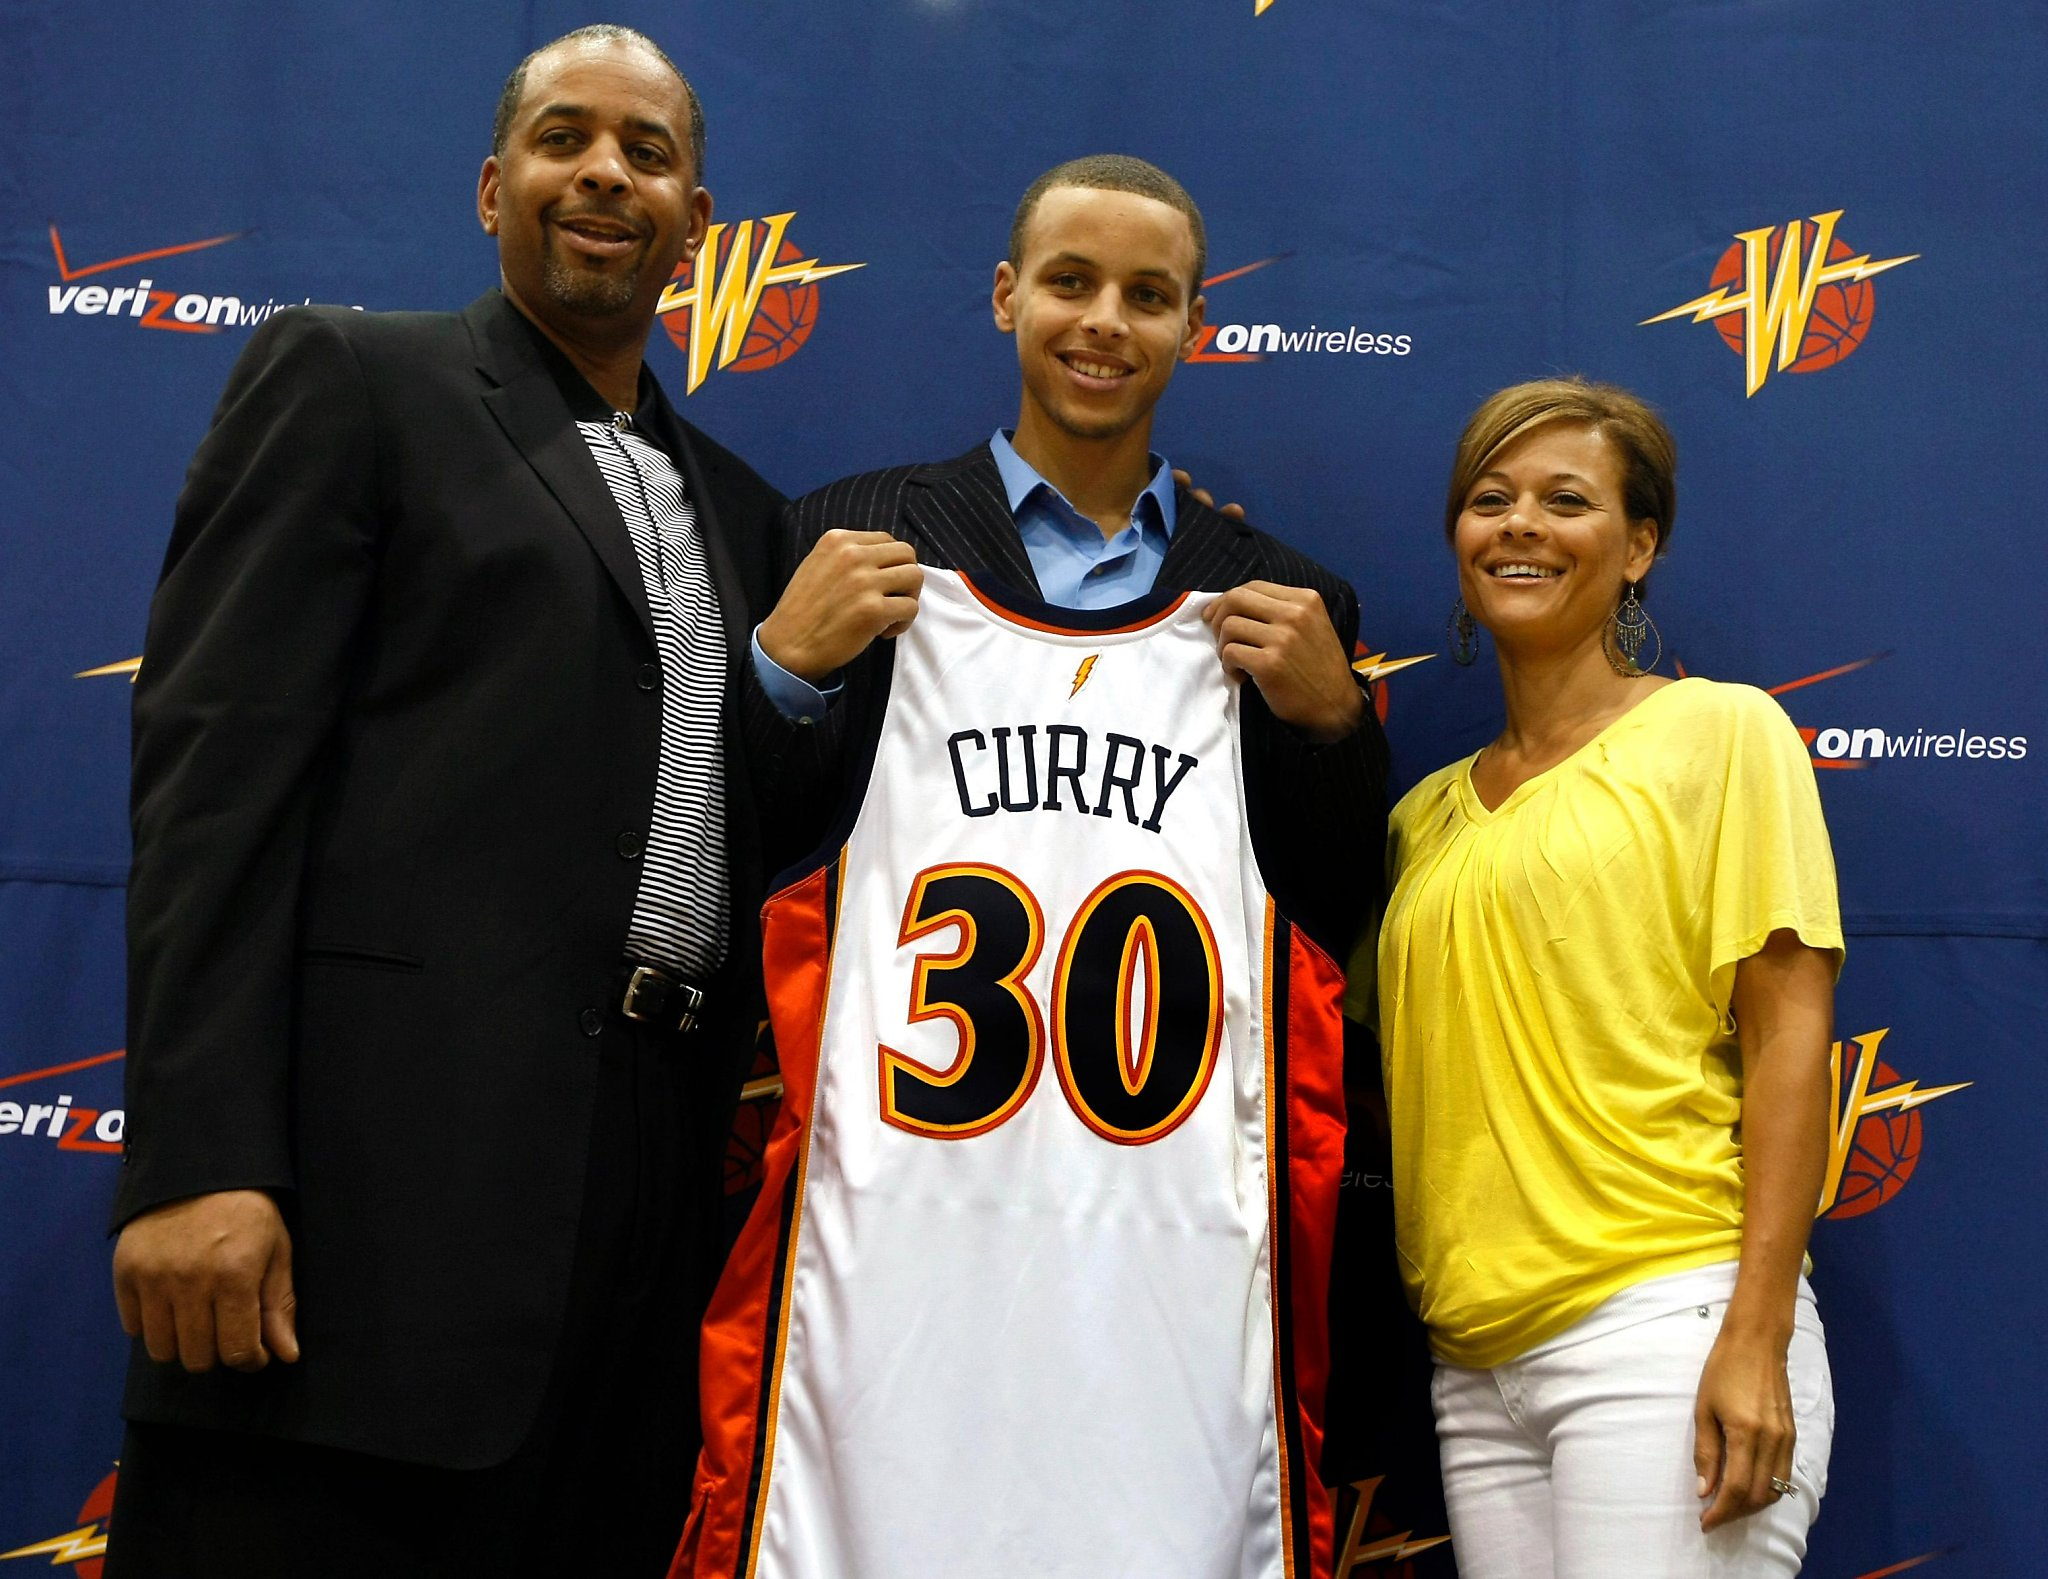 Stephen Curry credits God, family for his success